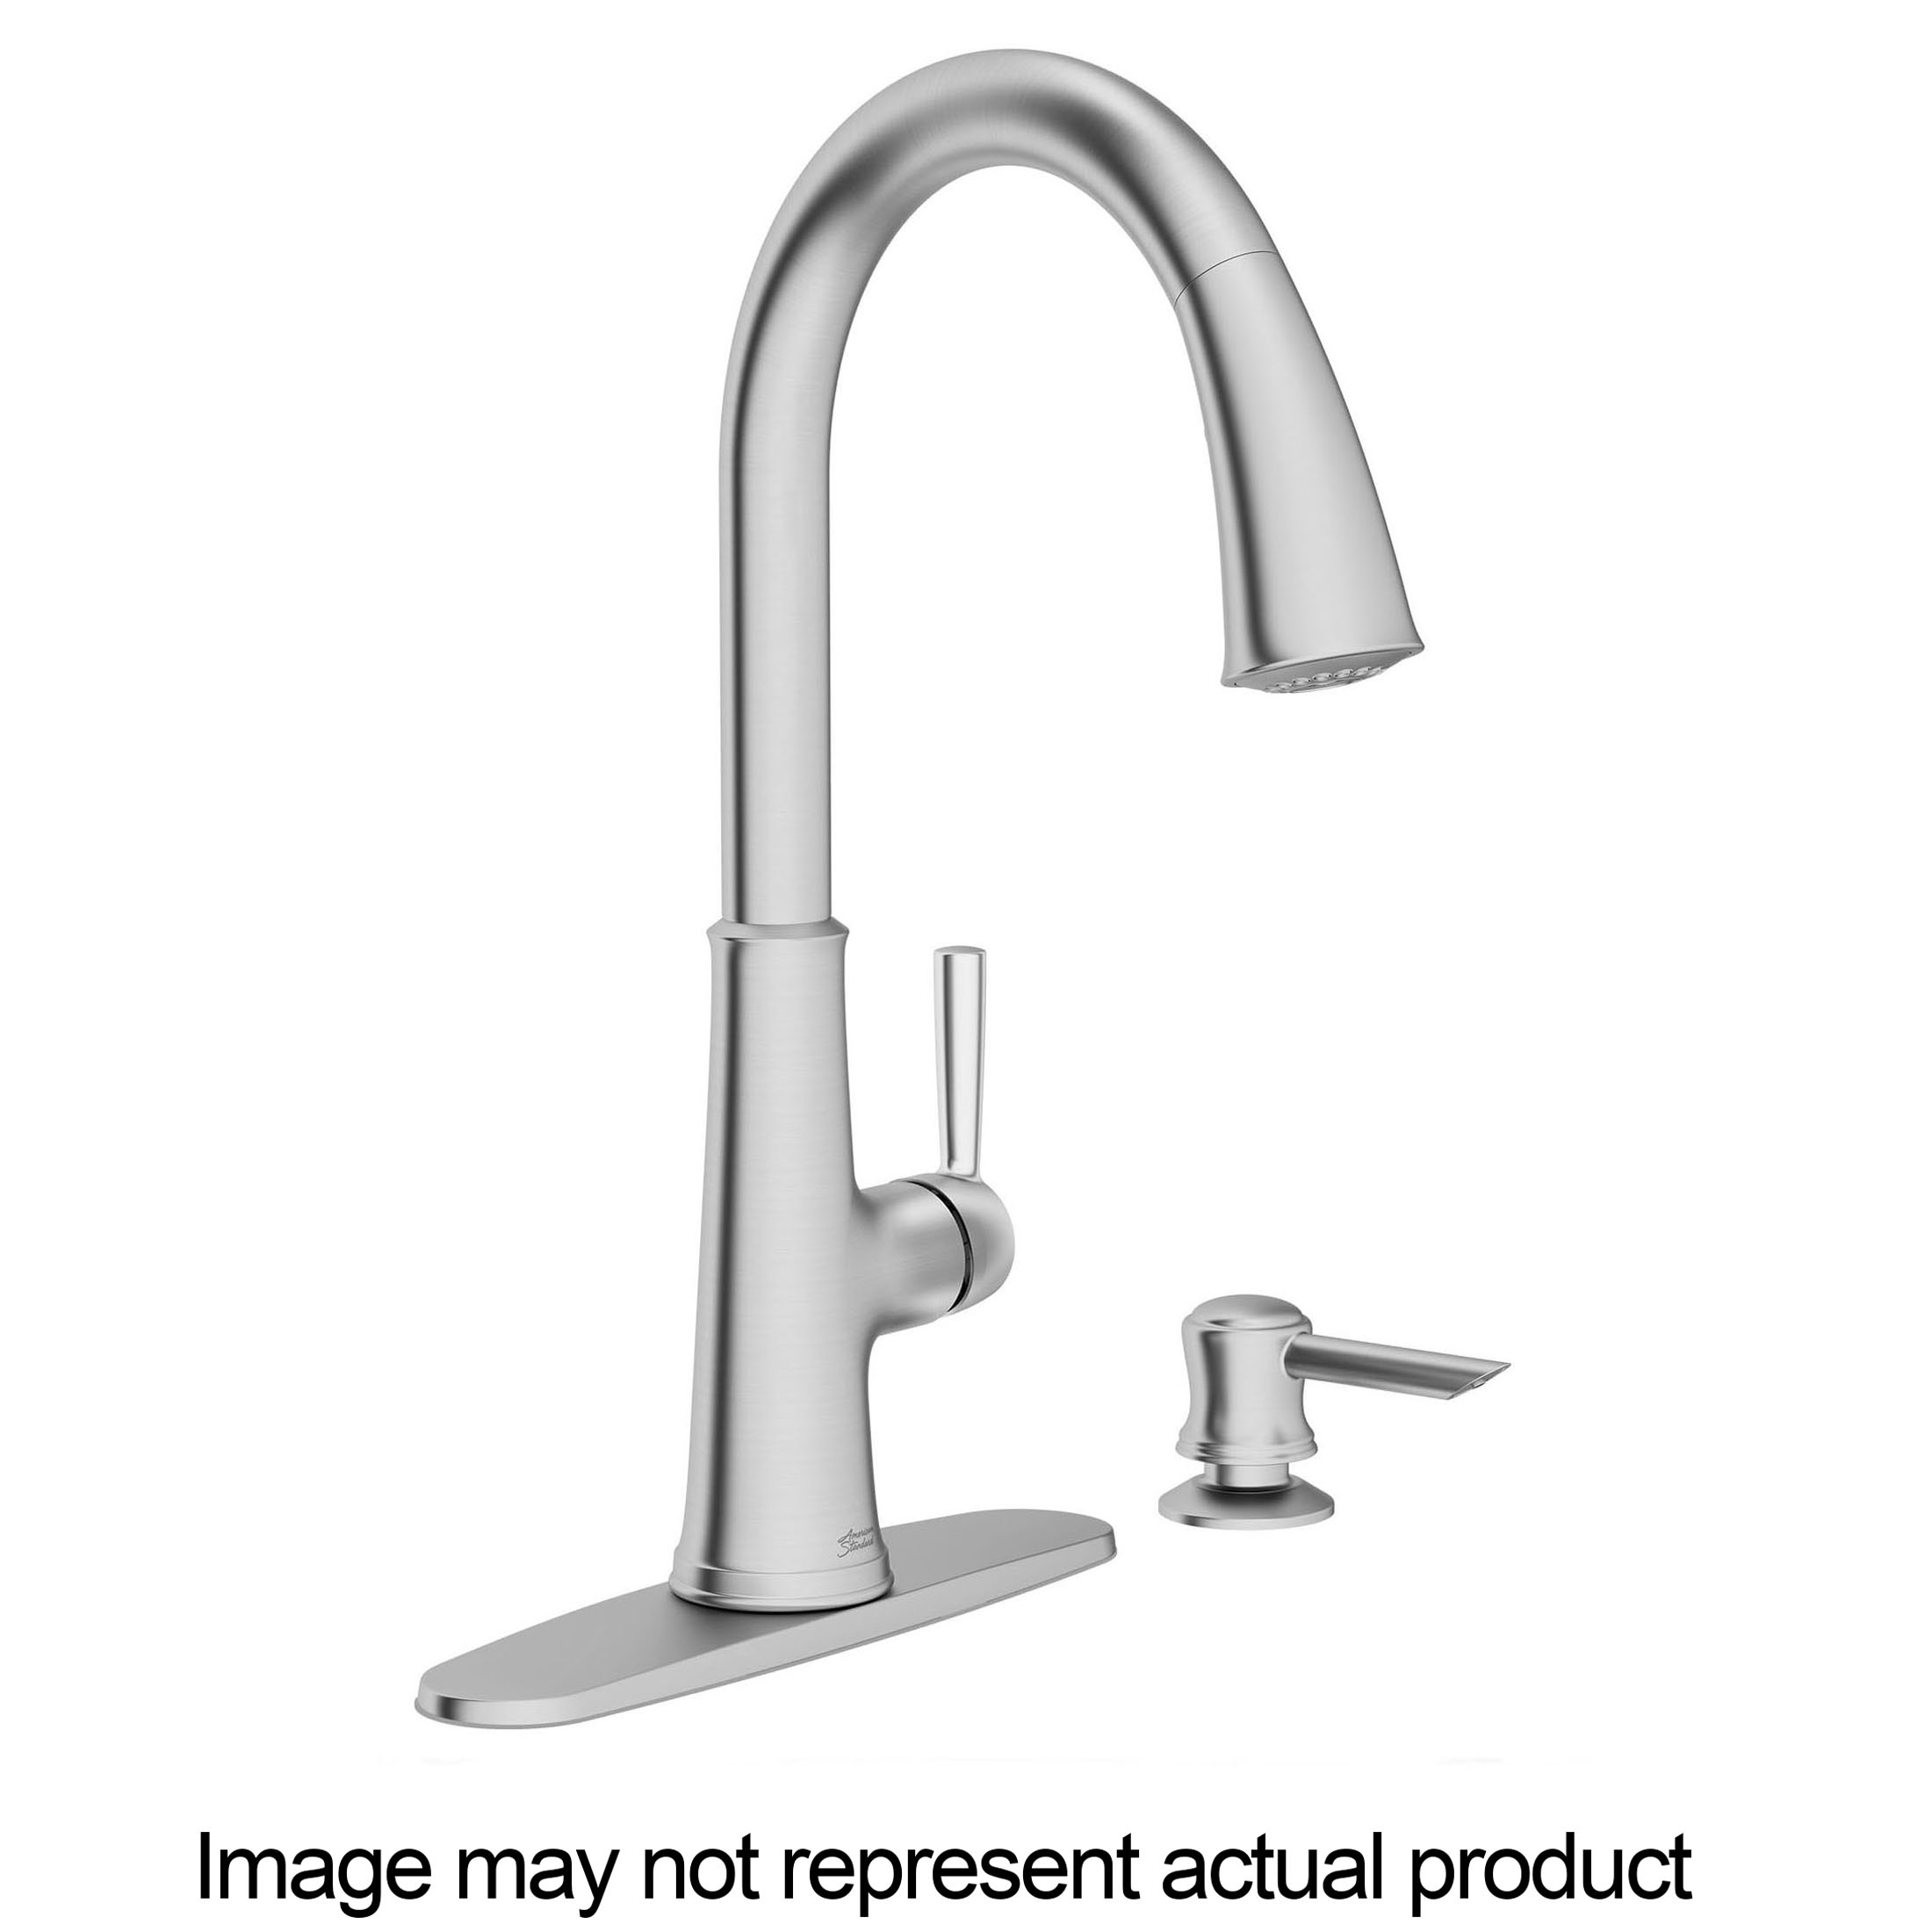 Maven Series 9319300.002 Pull-Down Kitchen Faucet with Soap Dispenser, 1.8 gpm, 1-Faucet Handle